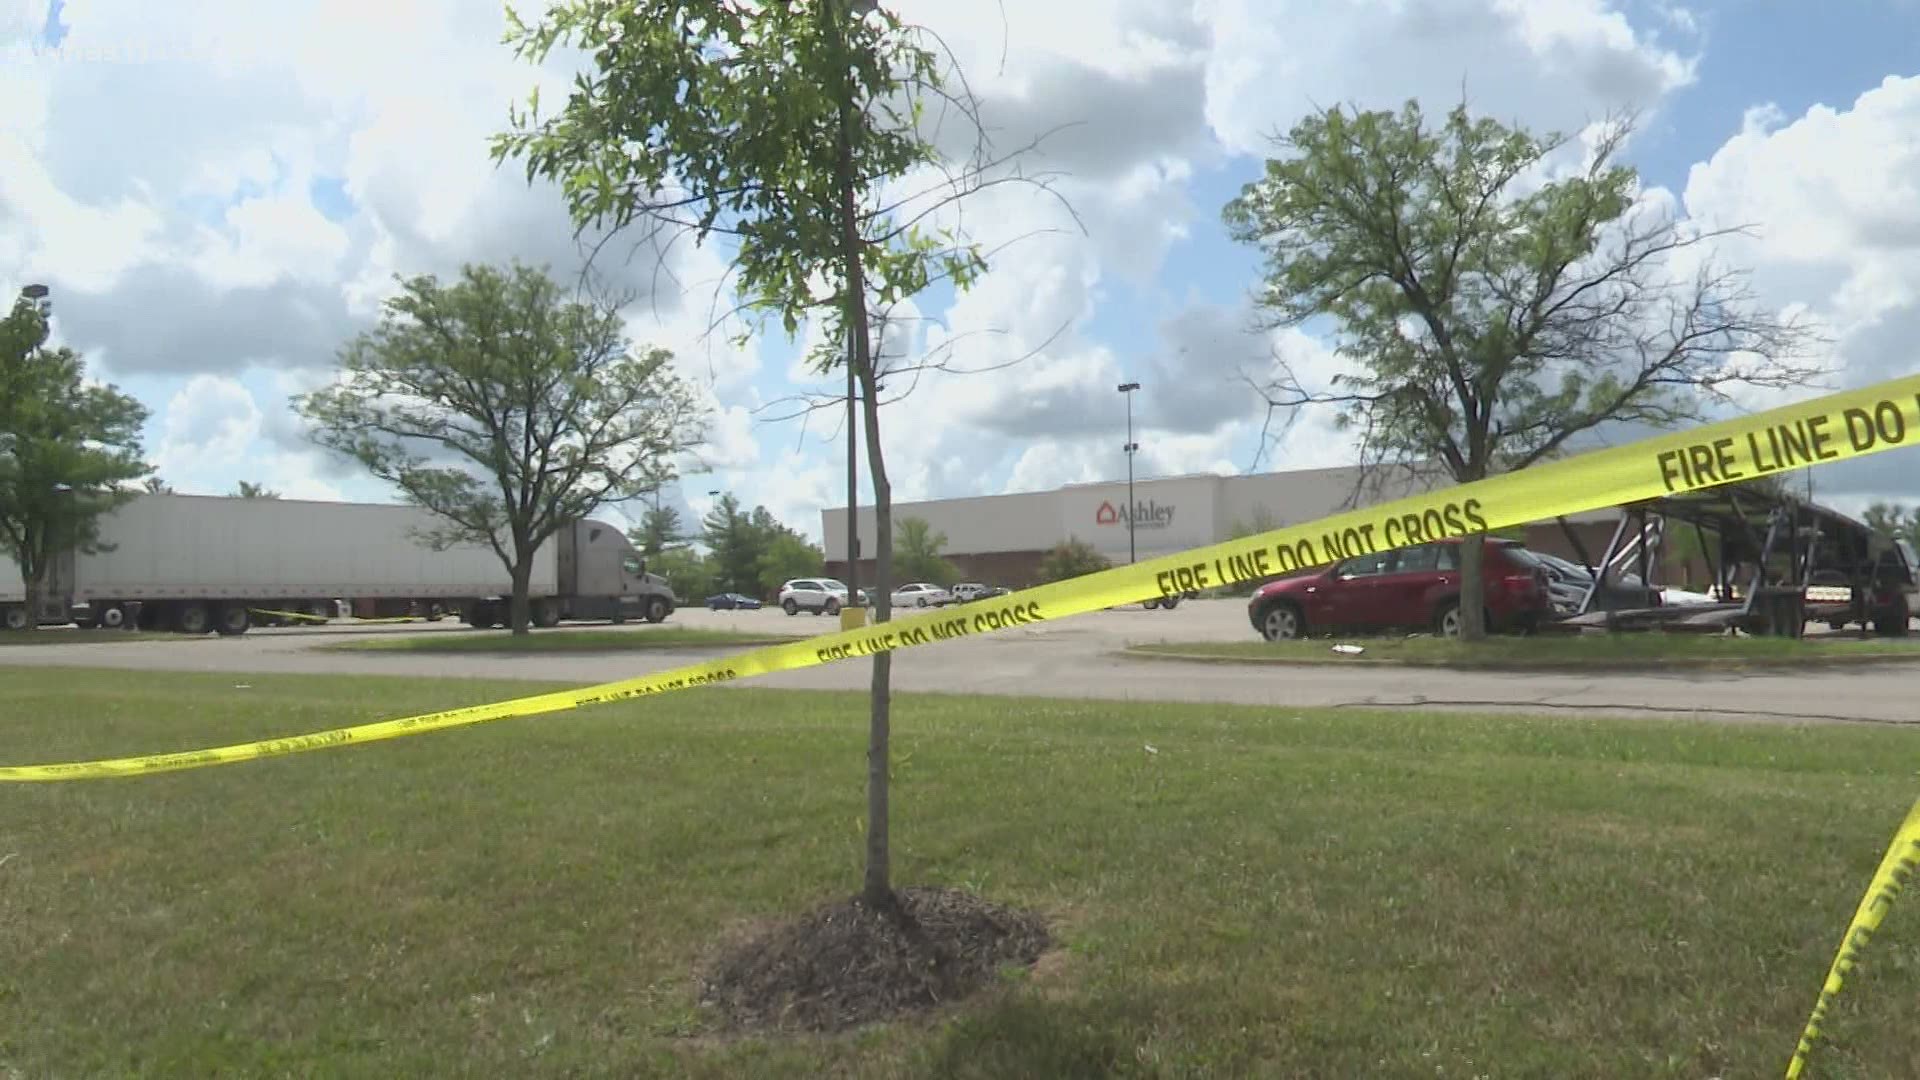 Health officials said the trailers found in the Ashley Furniture HomeStore were leaking fluids and crews took necessary precautions for cleanup.